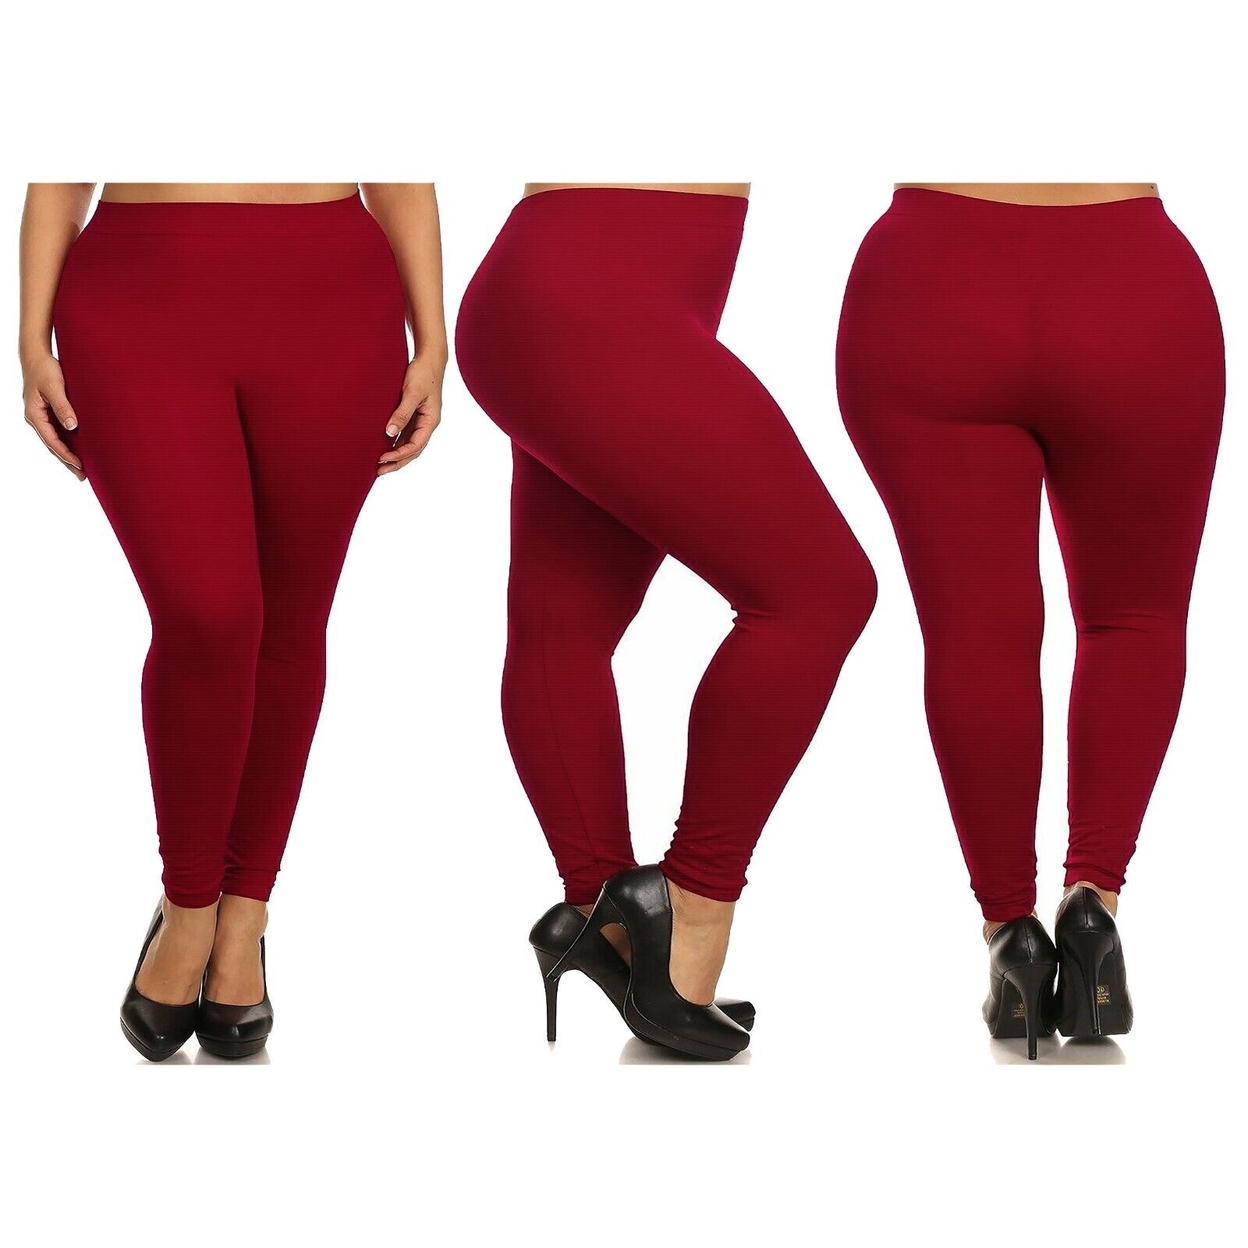 Multi-Pack: Women's Casual Ultra-Soft Smooth High Waisted Athletic Active Yoga Leggings Plus Size Available - 3-pack, 1x